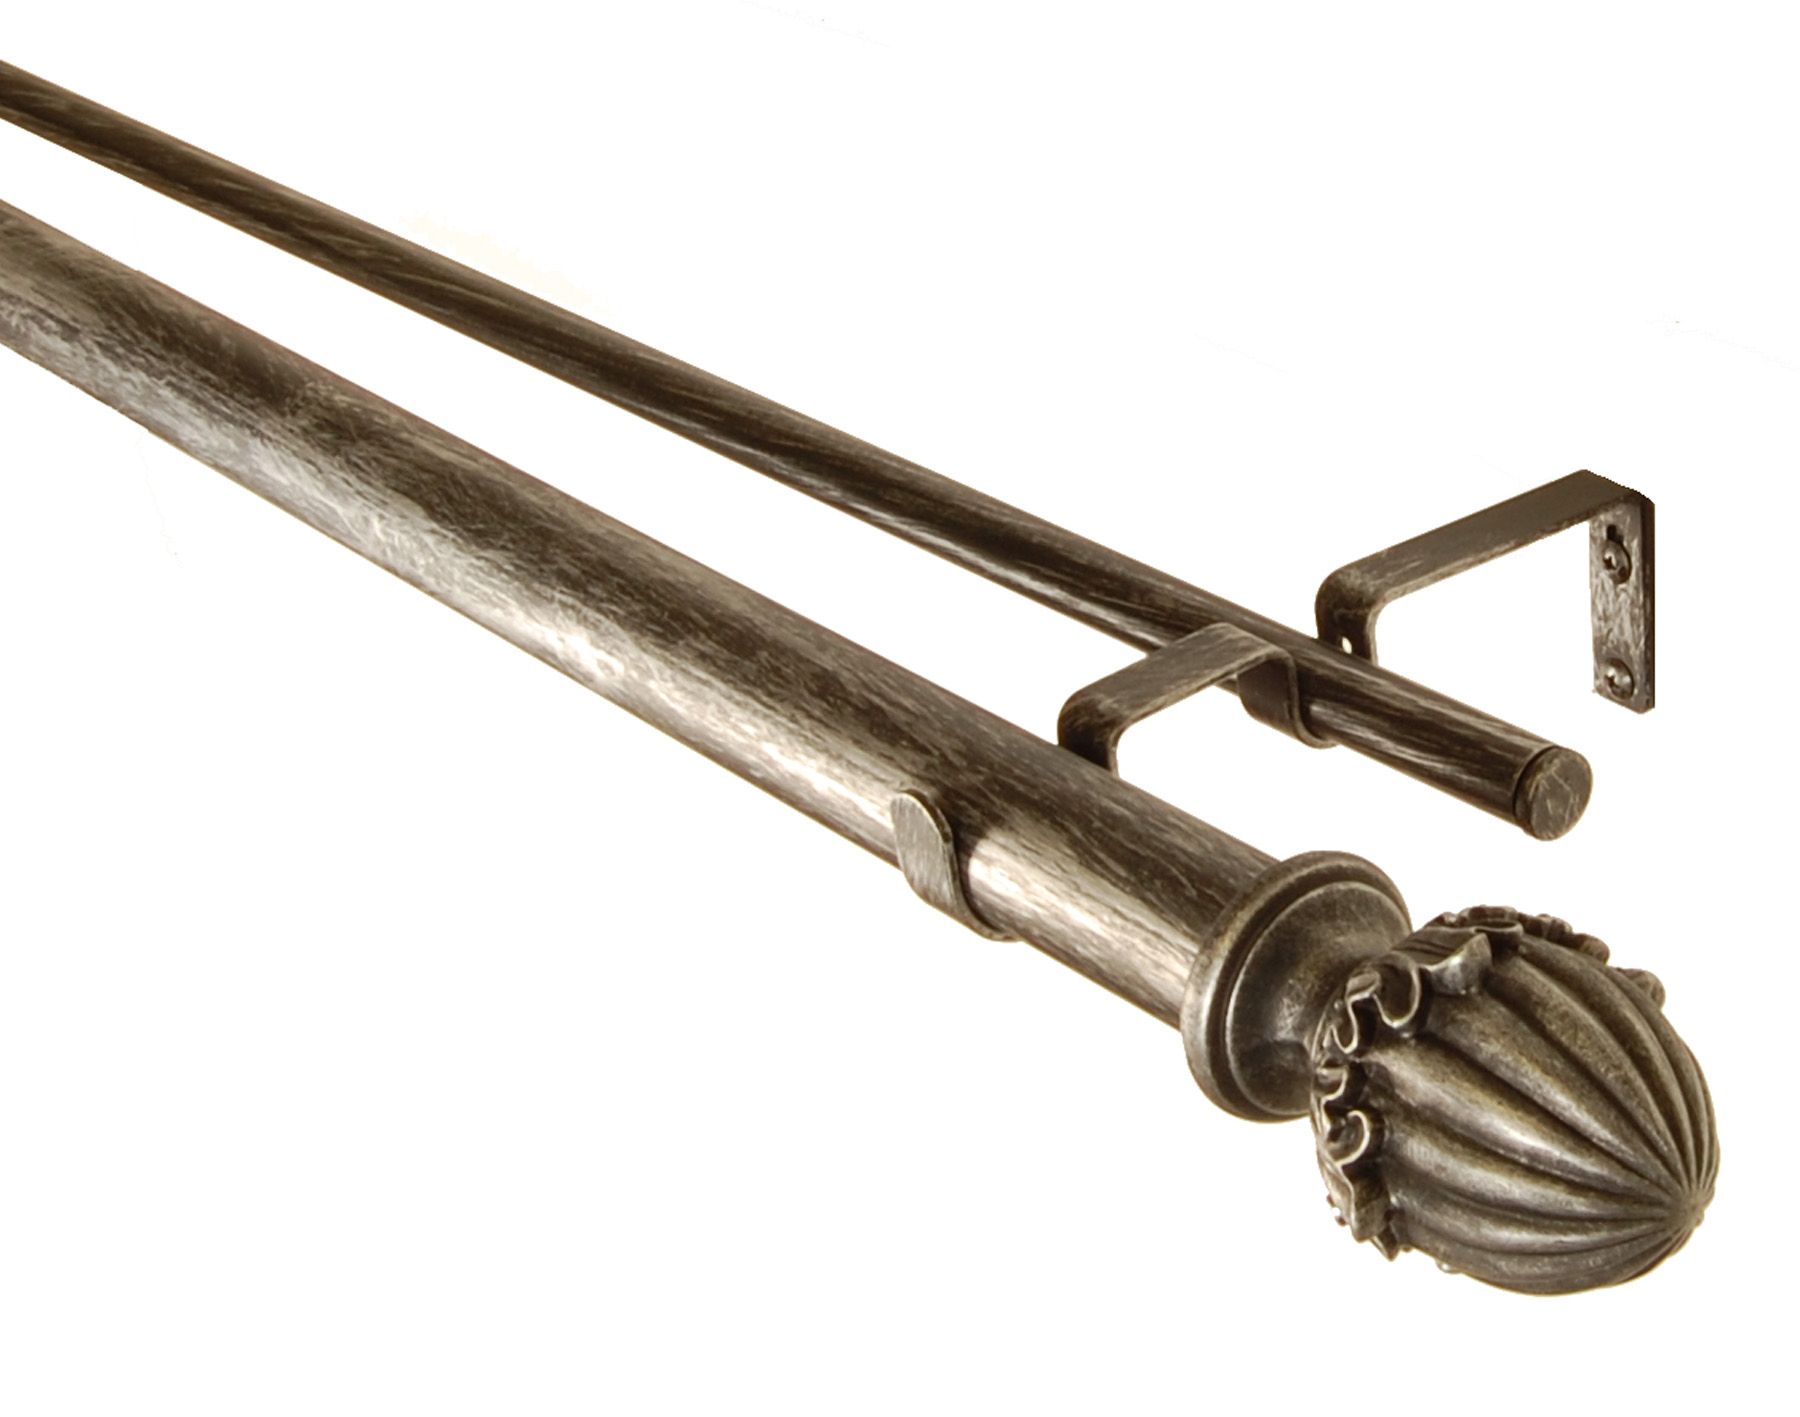 BCL Acorn Double Curtain Rod, Antique Silver Finish, 28-inch to 48-inch, 1.25-inch Diameter Pole